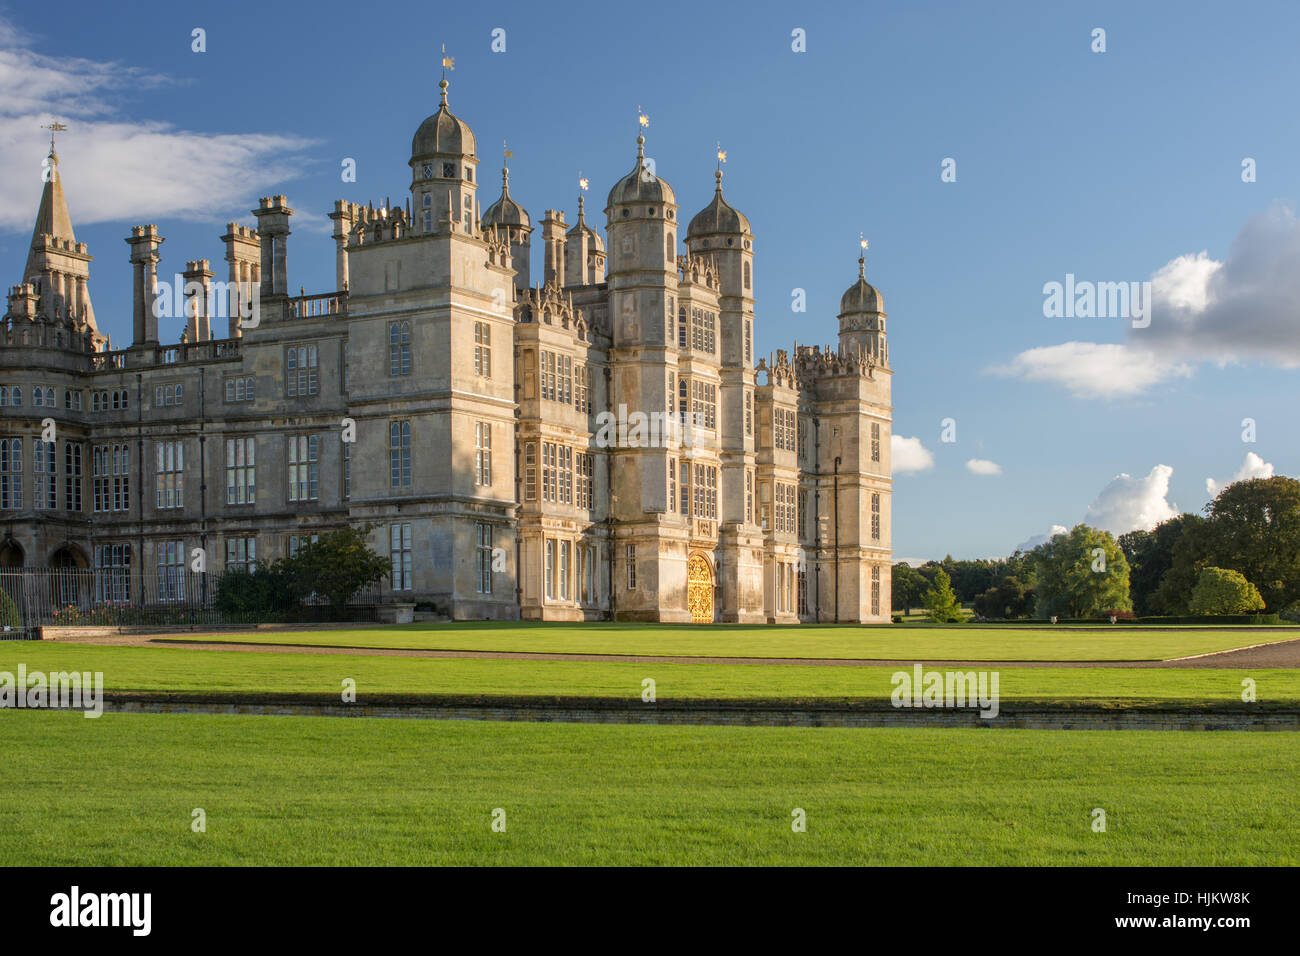 Burghley House, Stamford, Lincolnshire Stockfoto